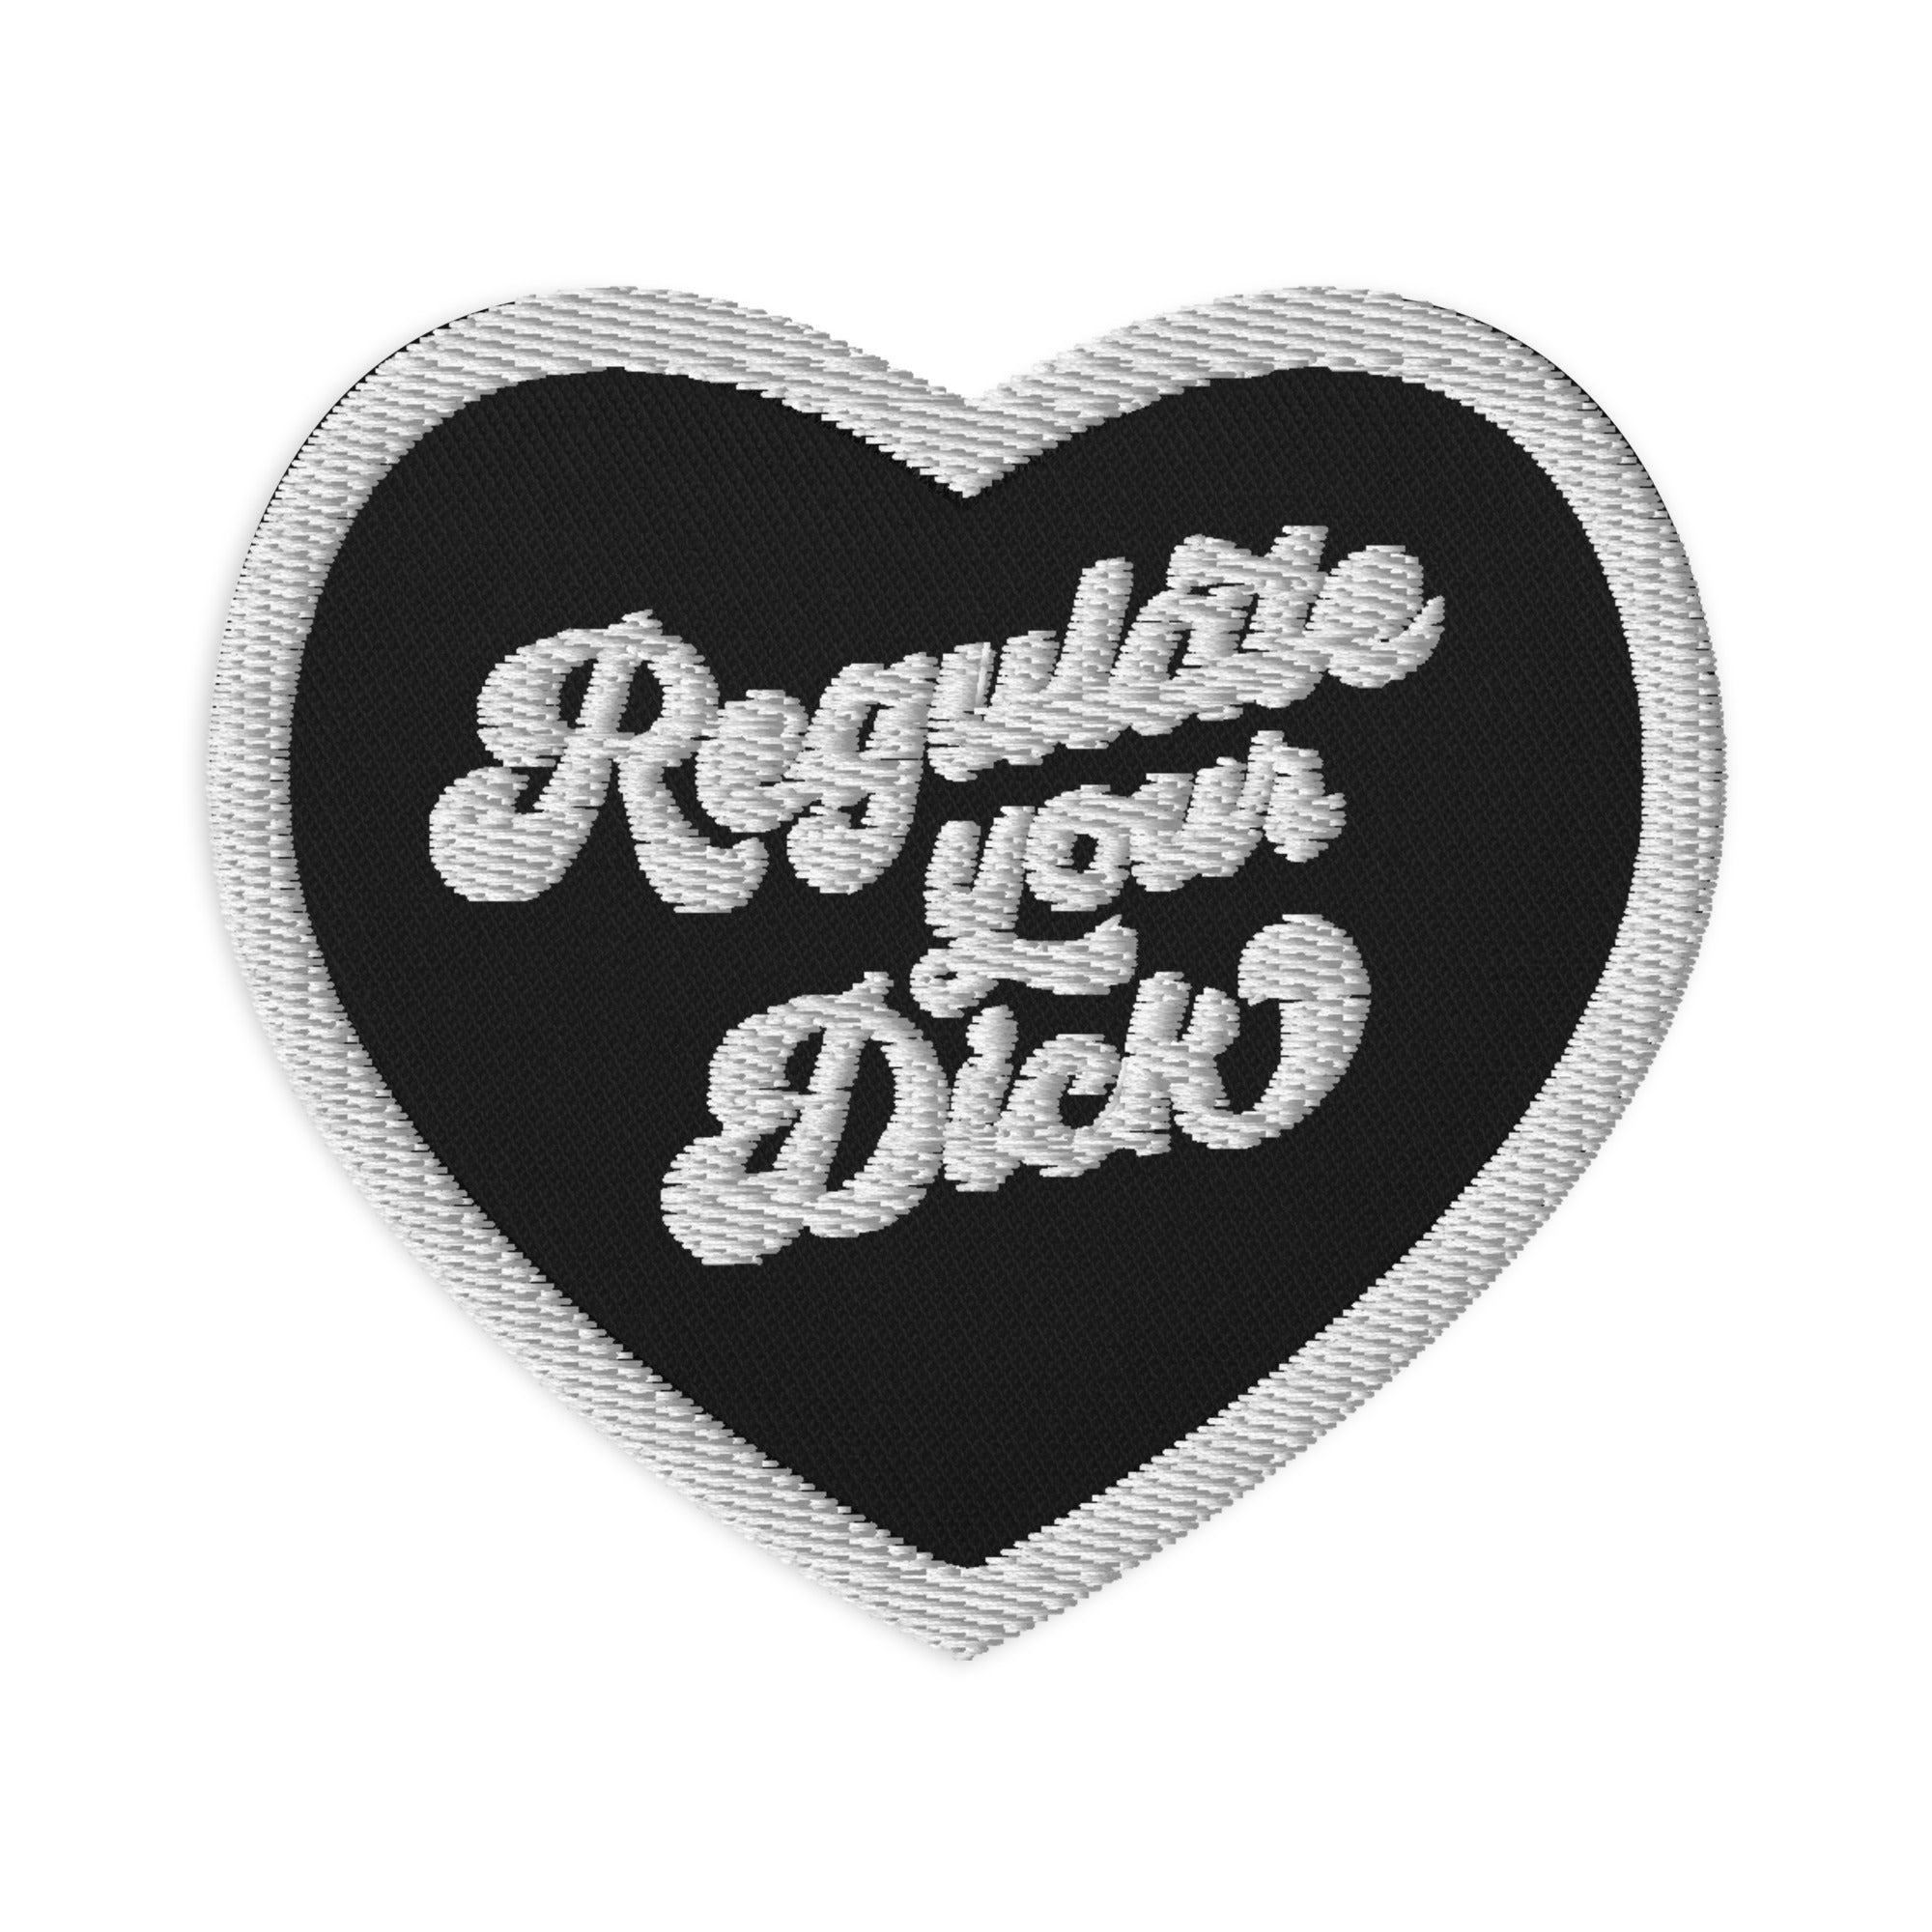 Regulate Your Dick Patch